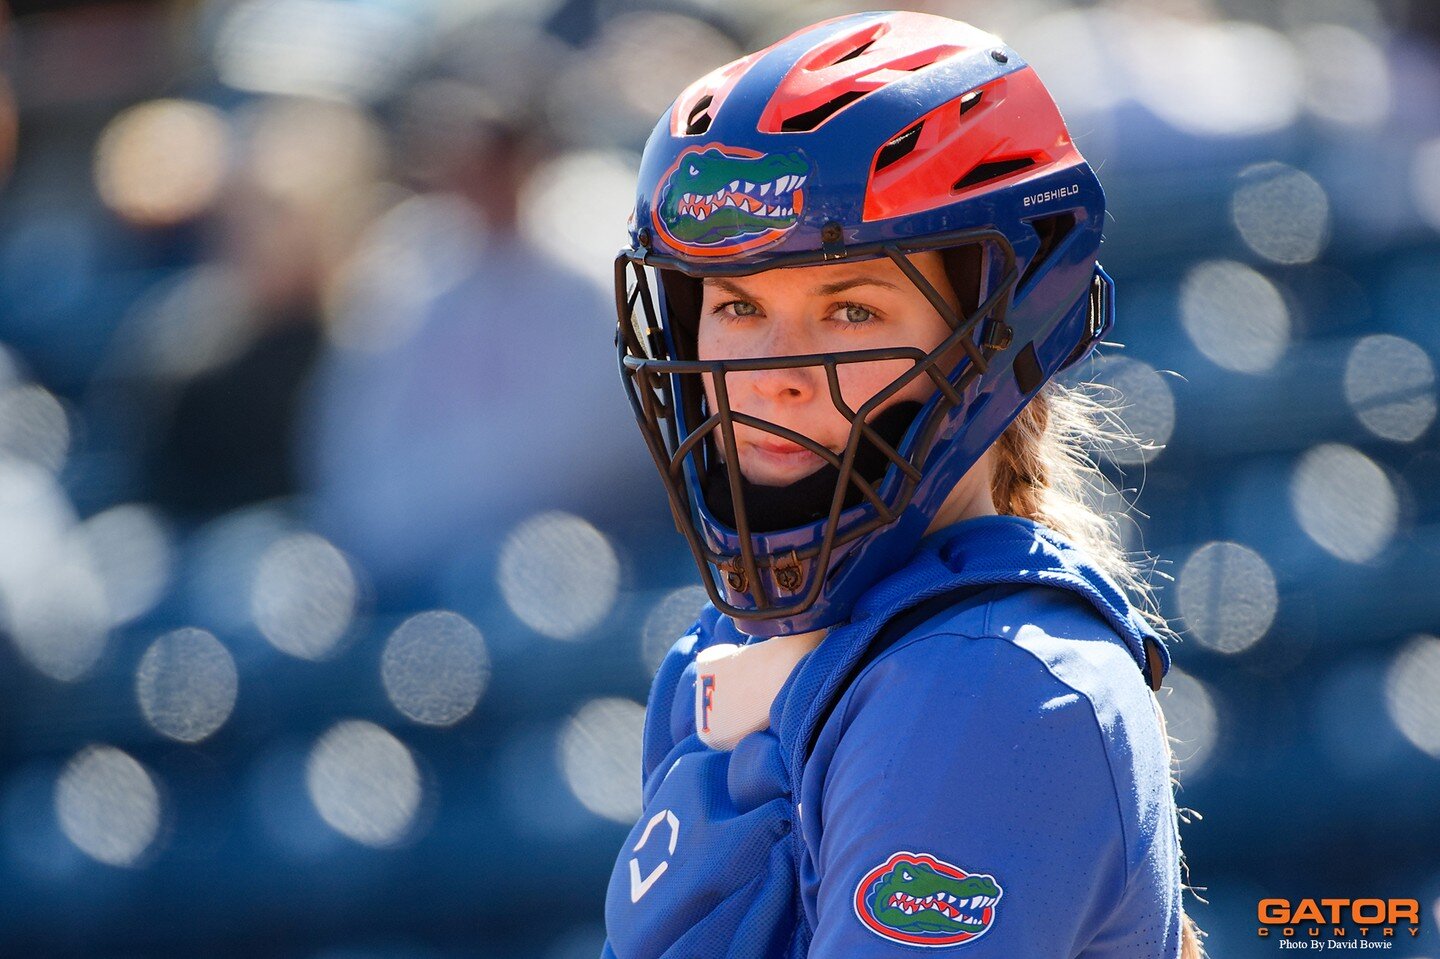 @gatorssb defeats Bowling Green 10-7! They are so much fun to cover, everyone make sure to get out to some of the games! #gatorssoftball #gogators #softball #bestofgainesville #gatornation